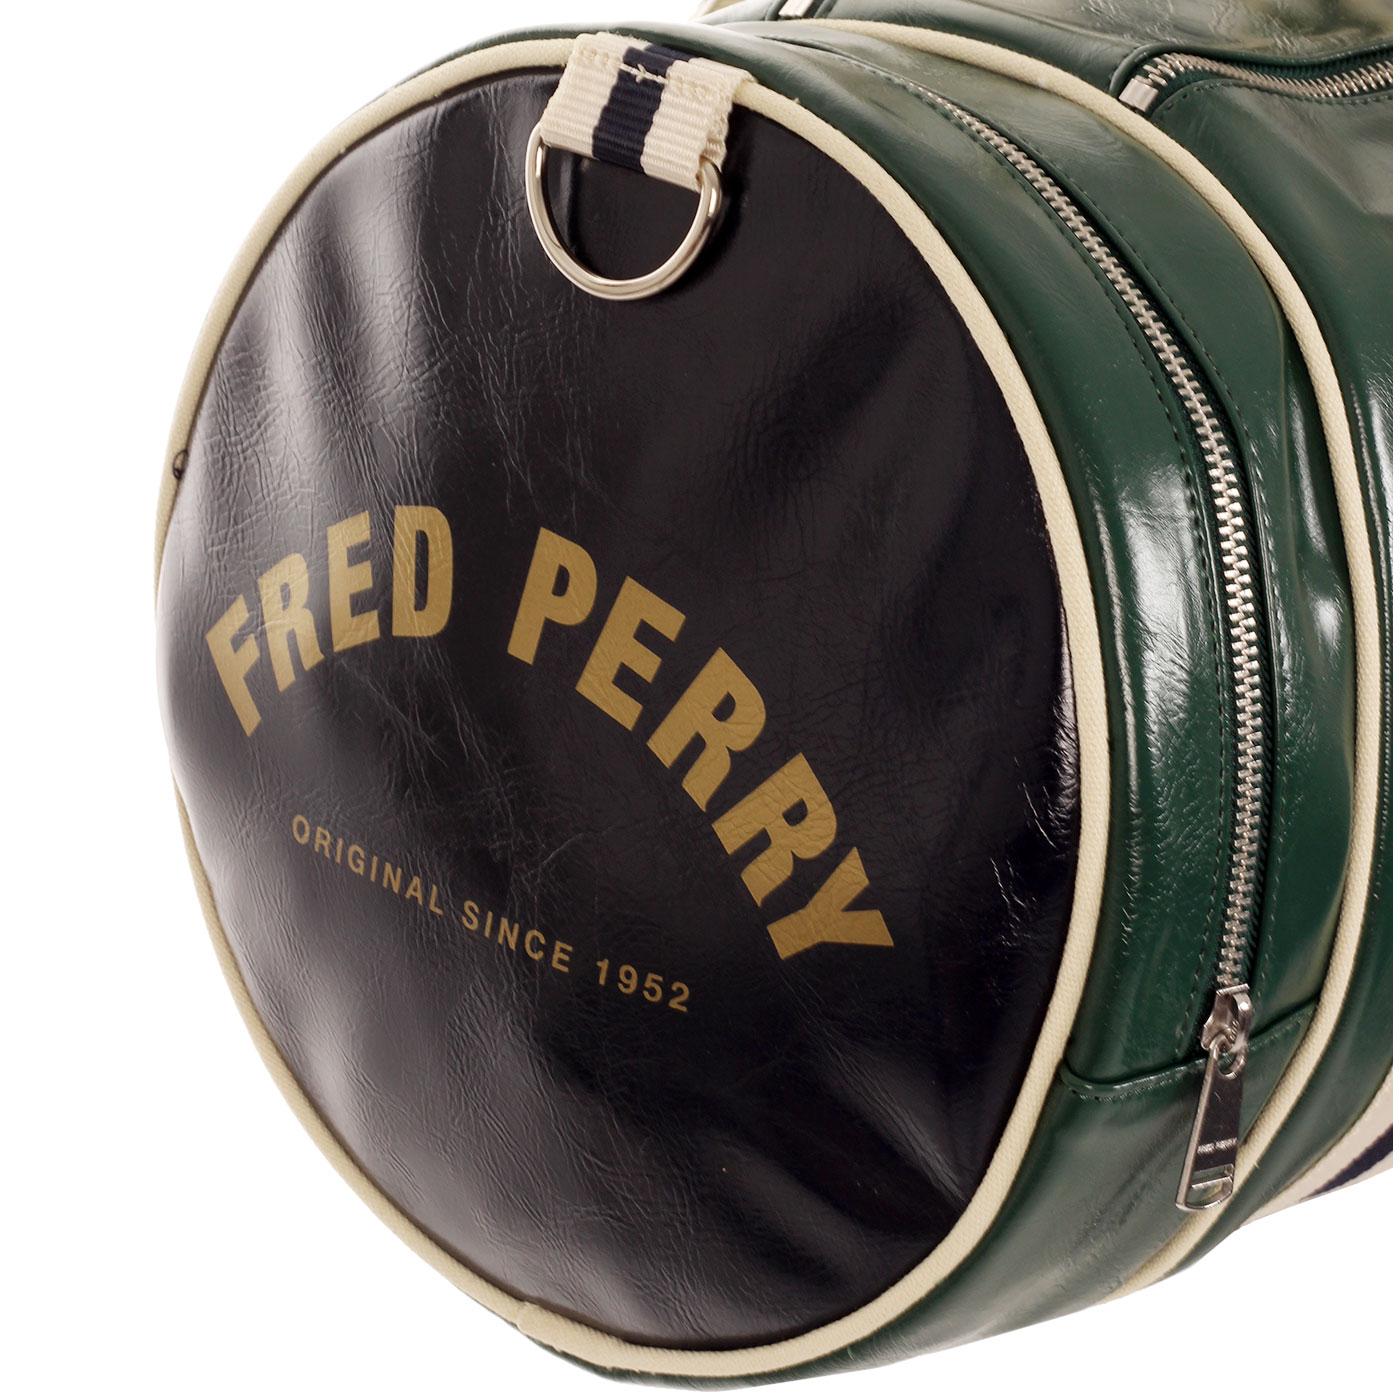 FRED PERRY Retro Colour Block Barrel Bag in Ivy & Navy